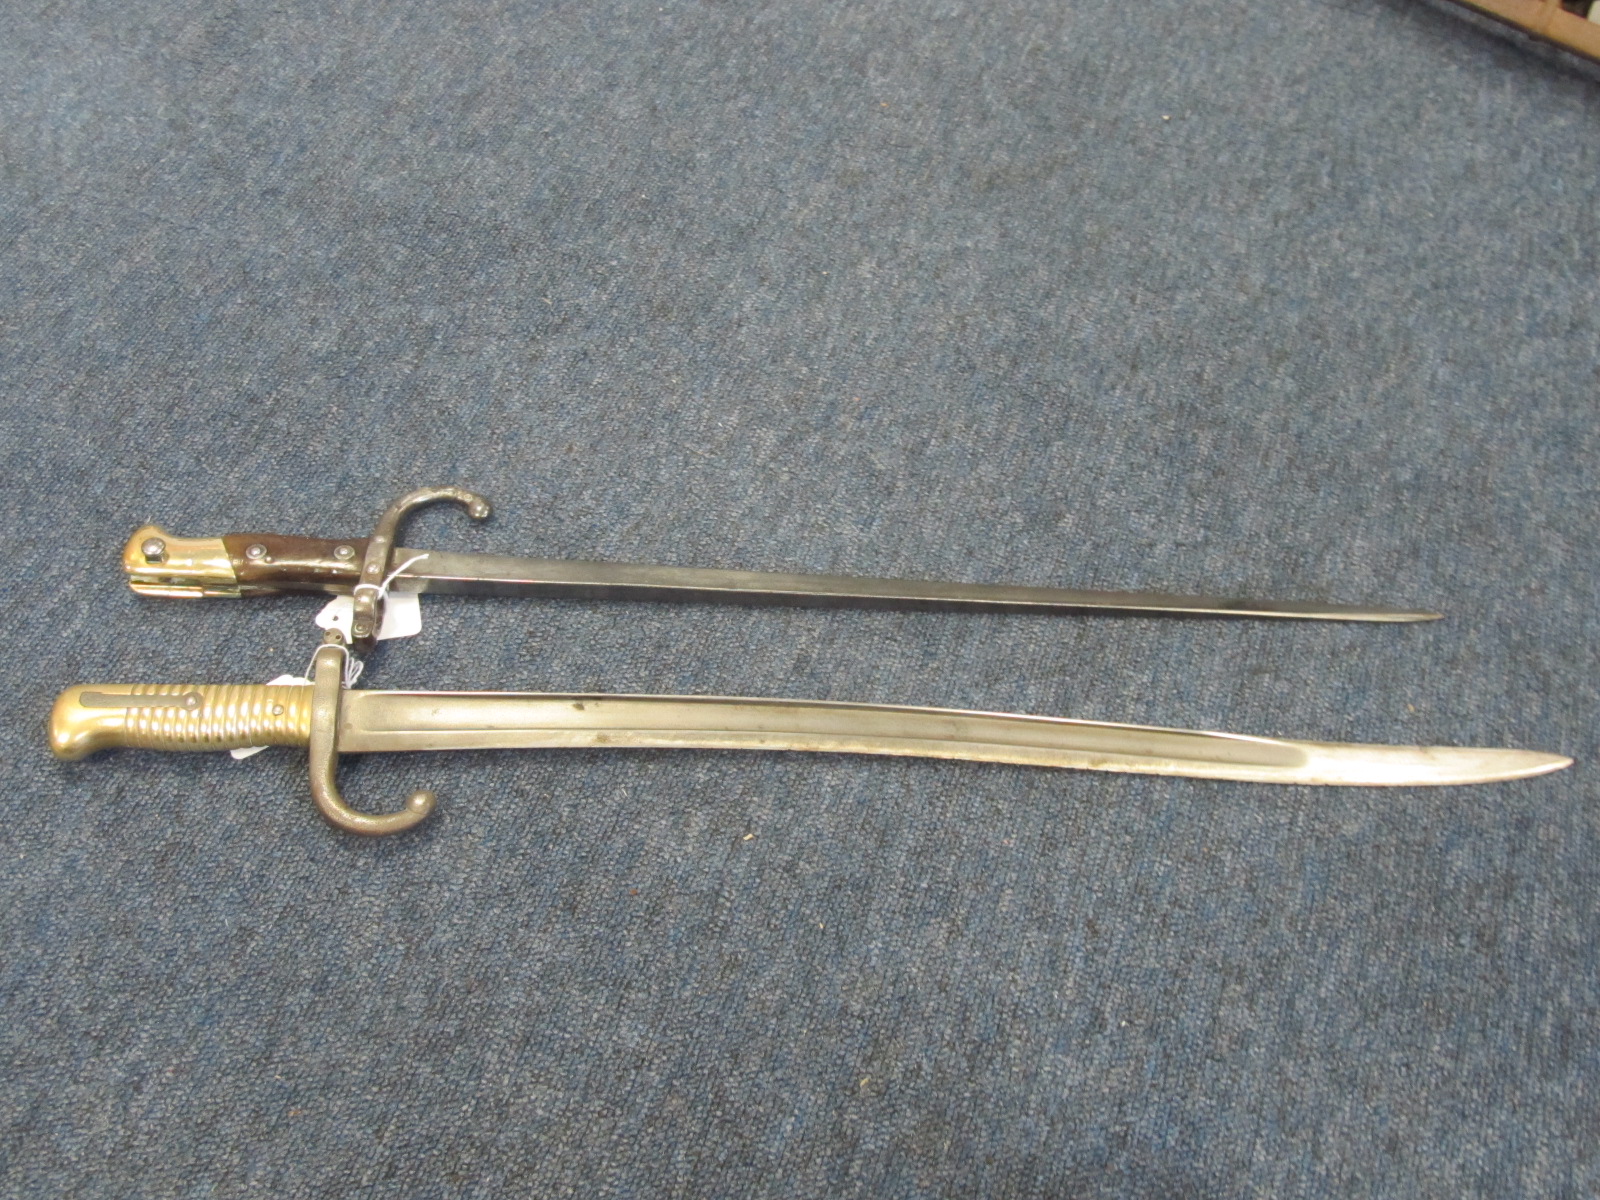 Bayonet-Model 1874 Gras Epee bayonet. No scabbard. Made at St Etienne, June 1876 overall good